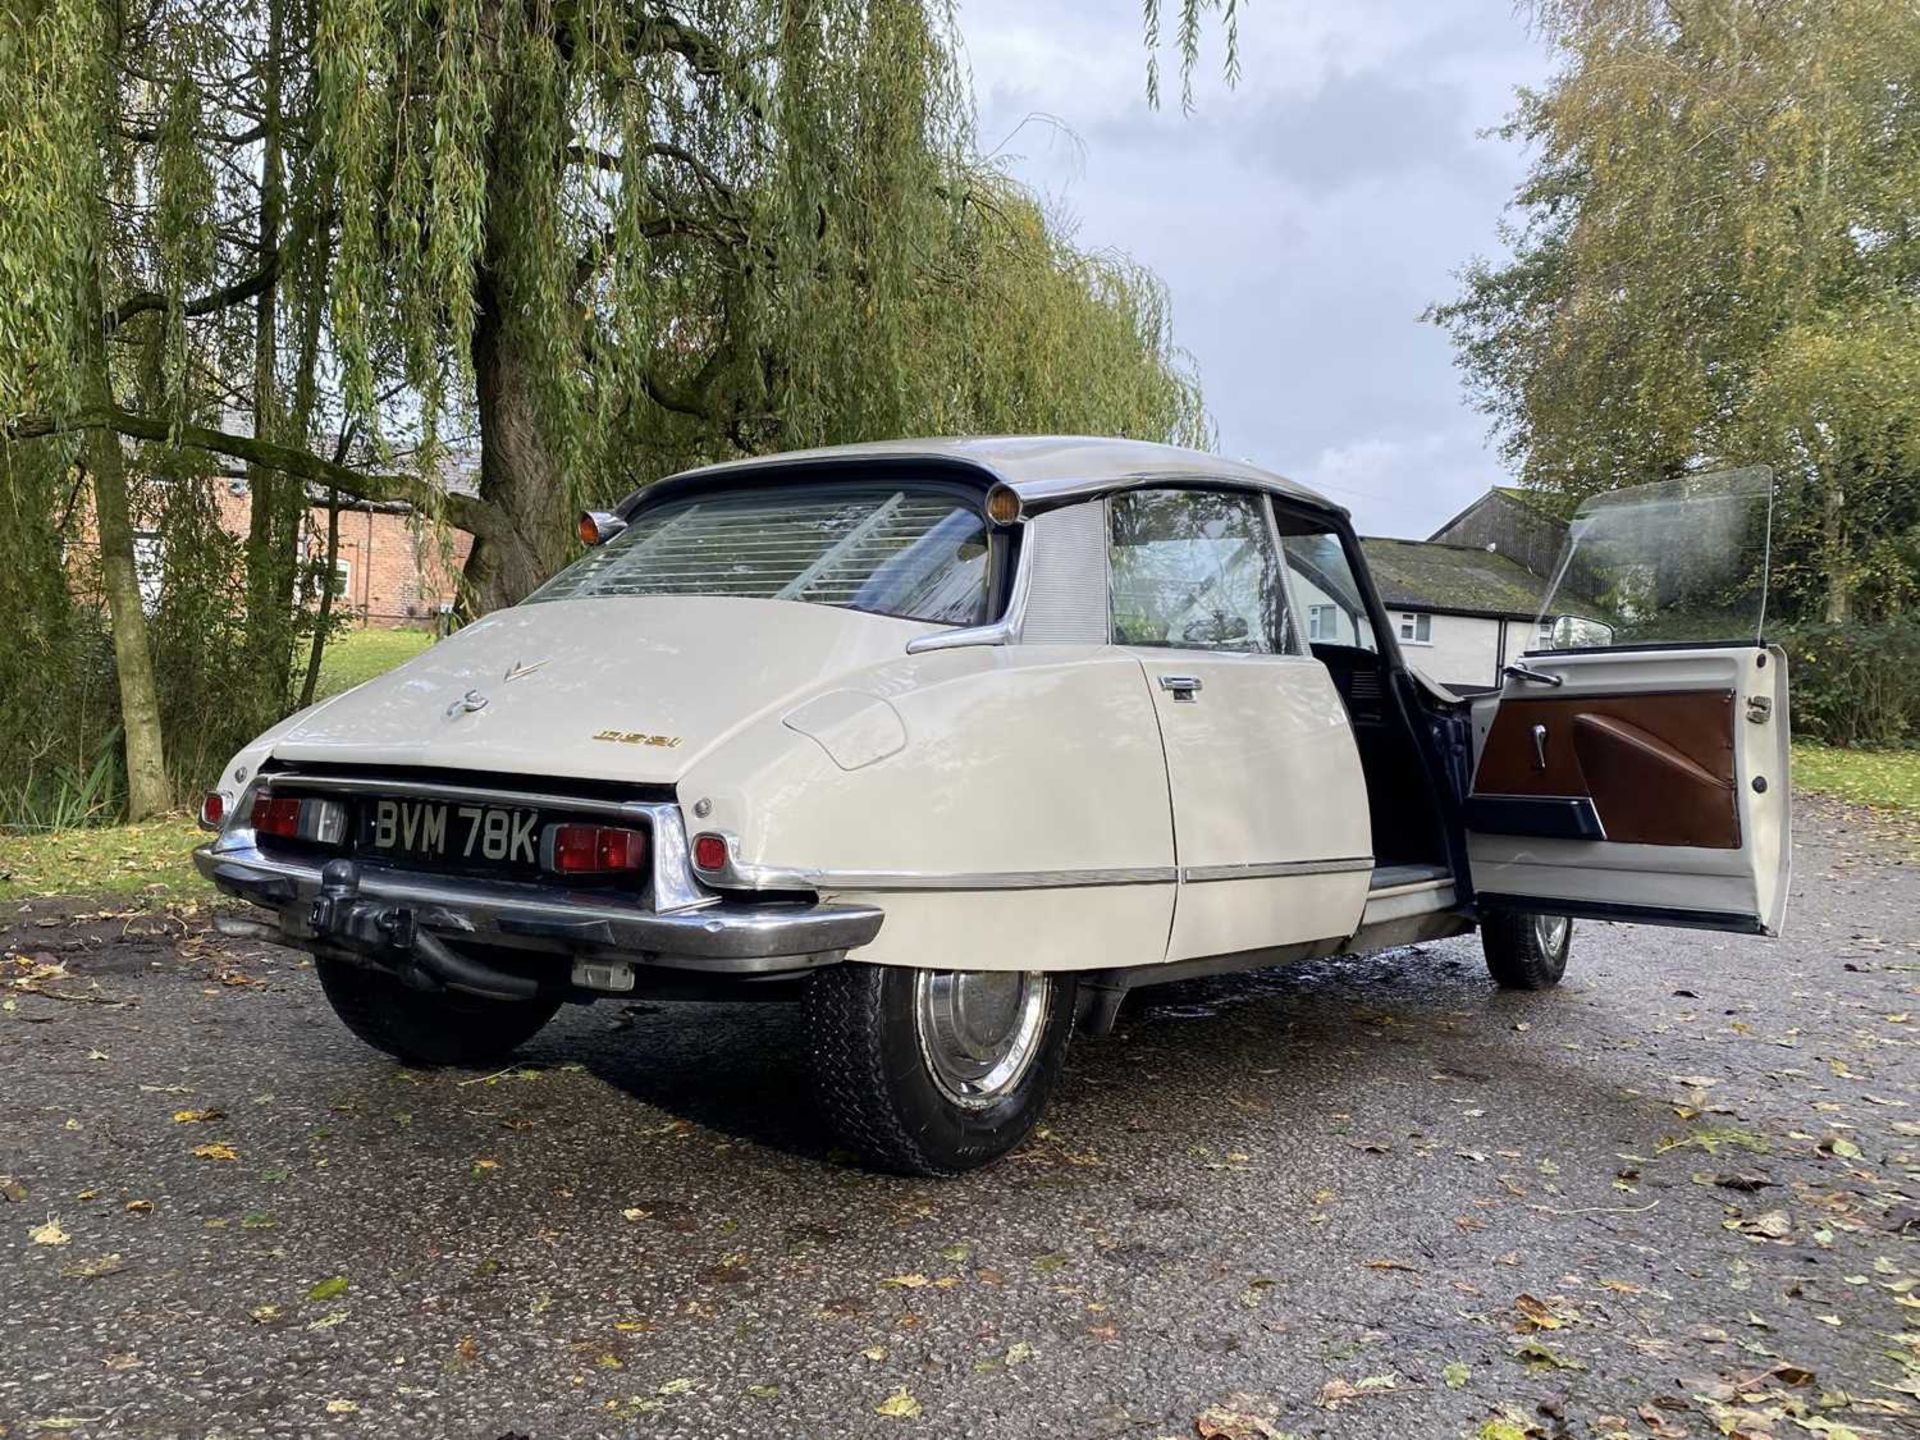 1971 Citroën DS21 Recently completed a 2,000 mile European grand tour - Image 30 of 100